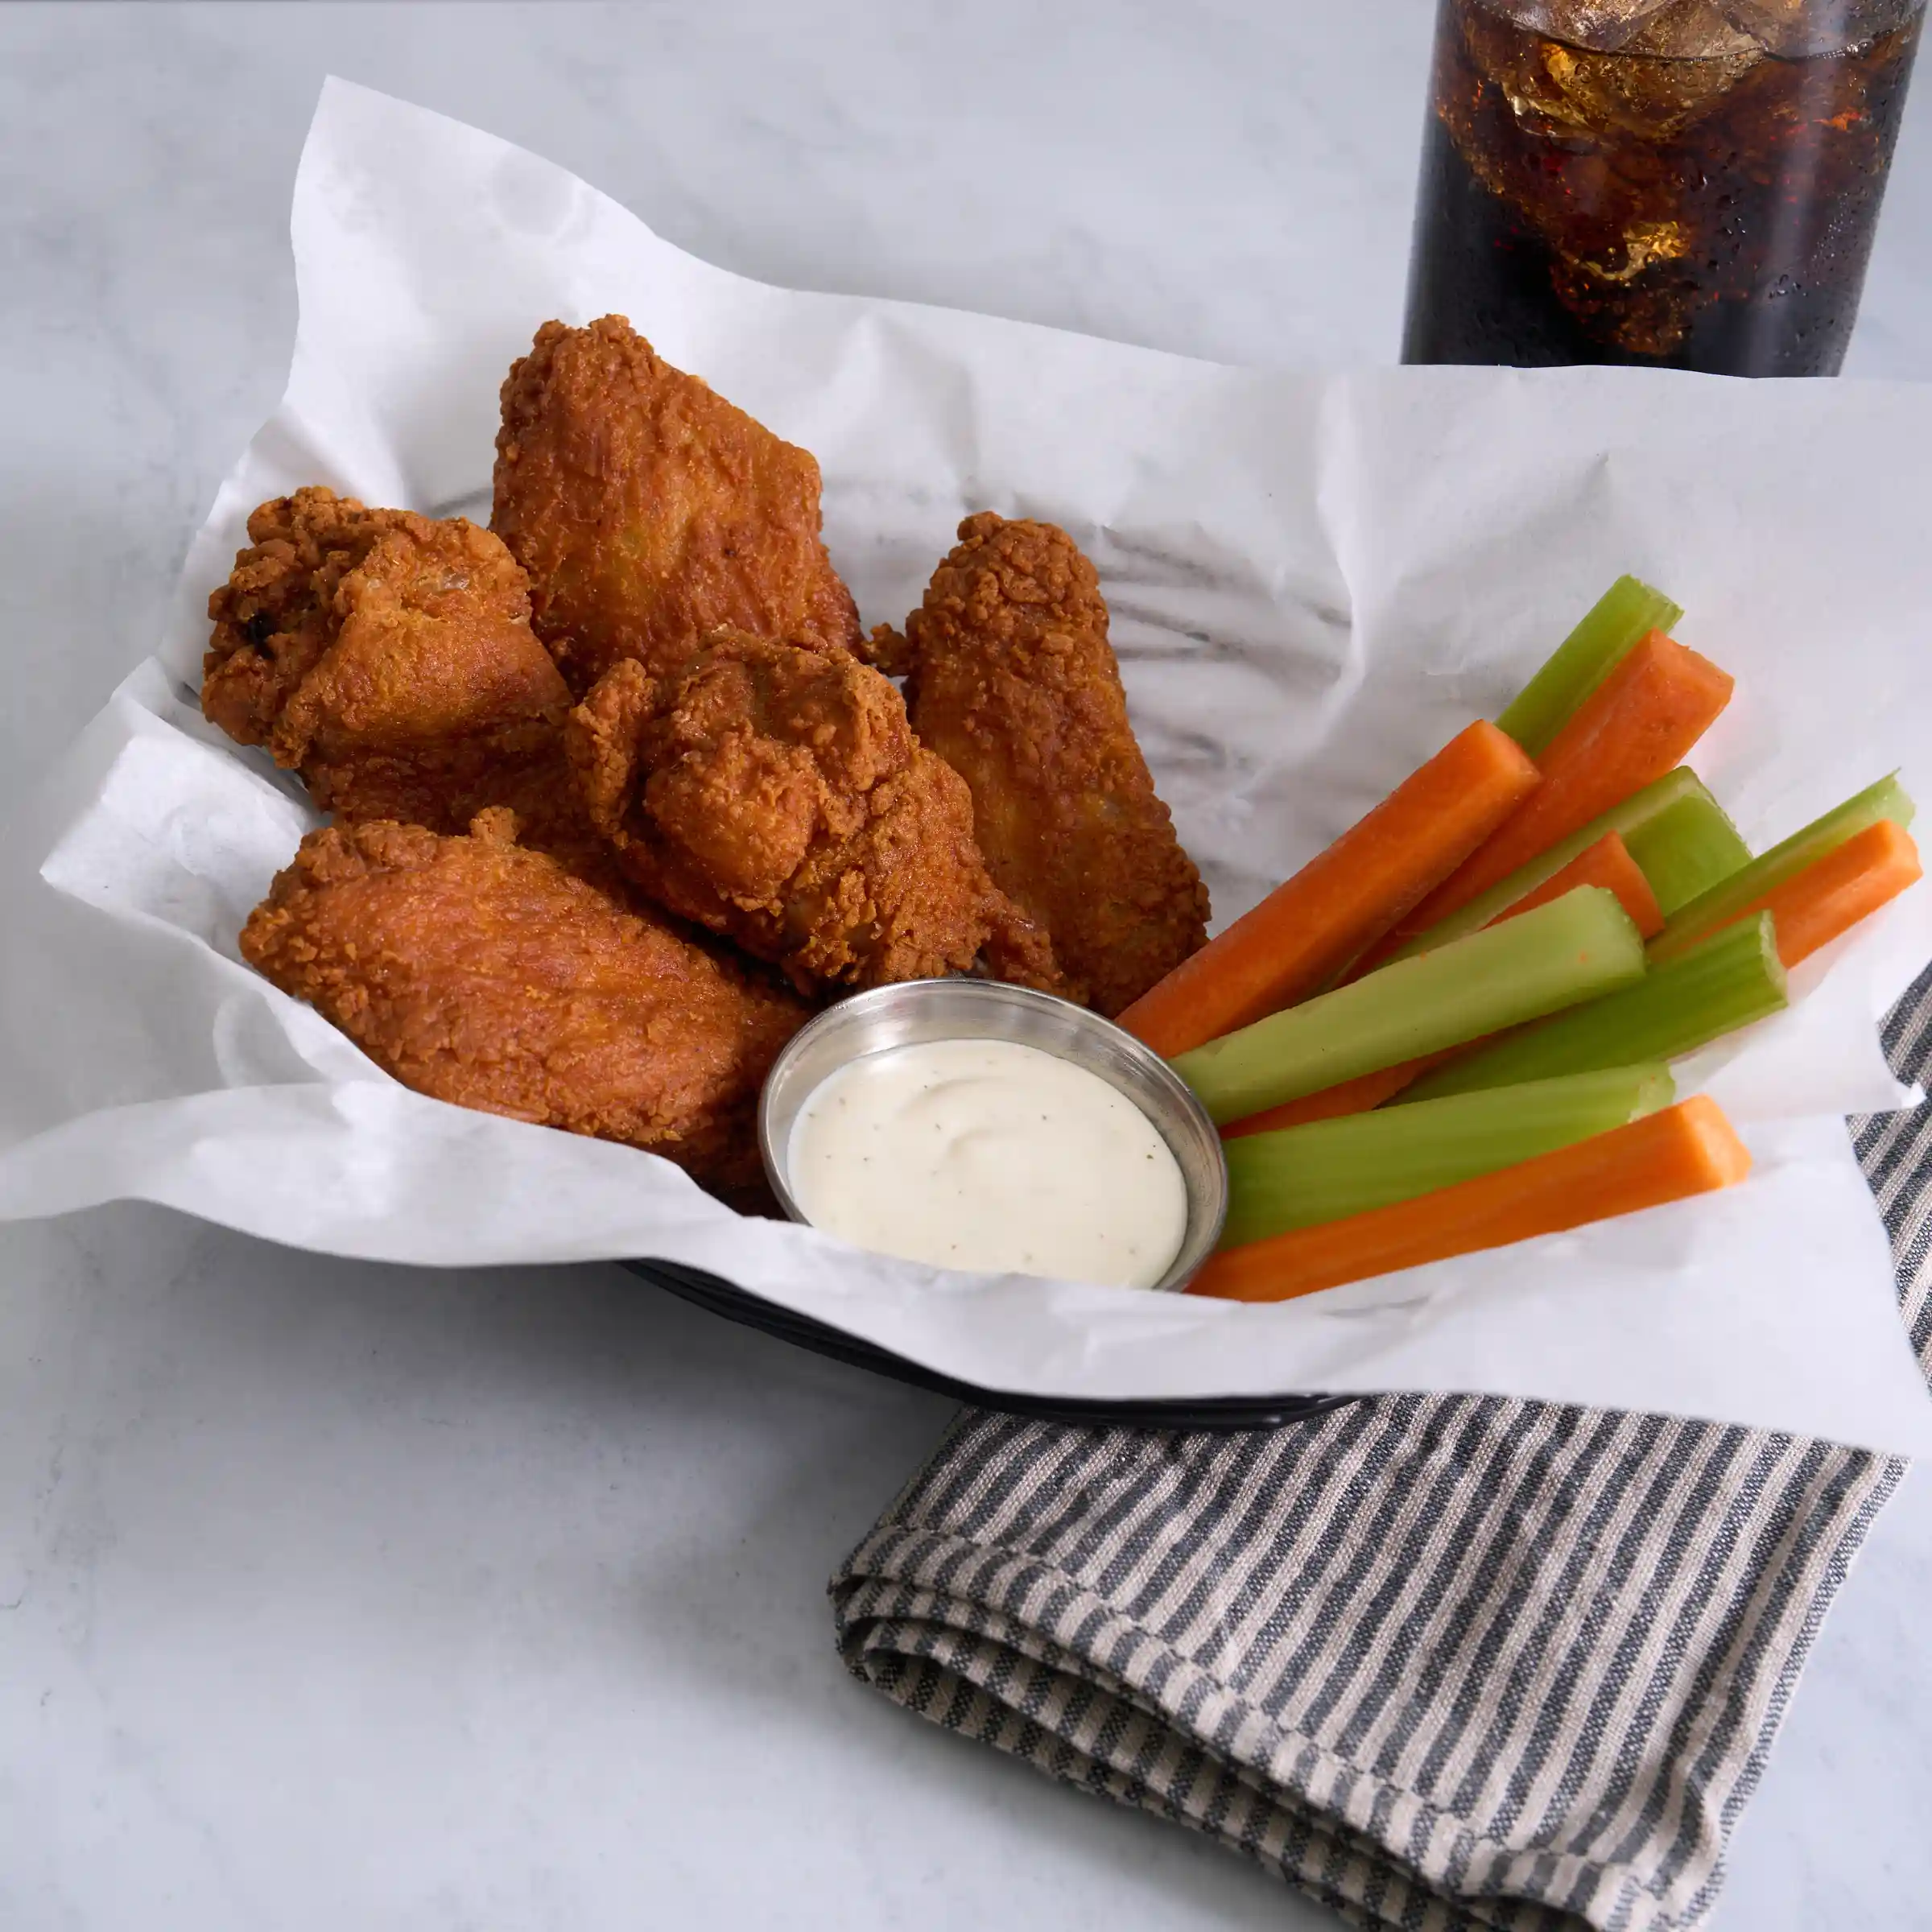 Tyson® Fire Stingers® Fully Cooked Breaded Bone-In Chicken Wing Sections, Jumbohttps://images.salsify.com/image/upload/s--NWM3ge5O--/q_25/hrwd7srve6bx8tmfibat.webp